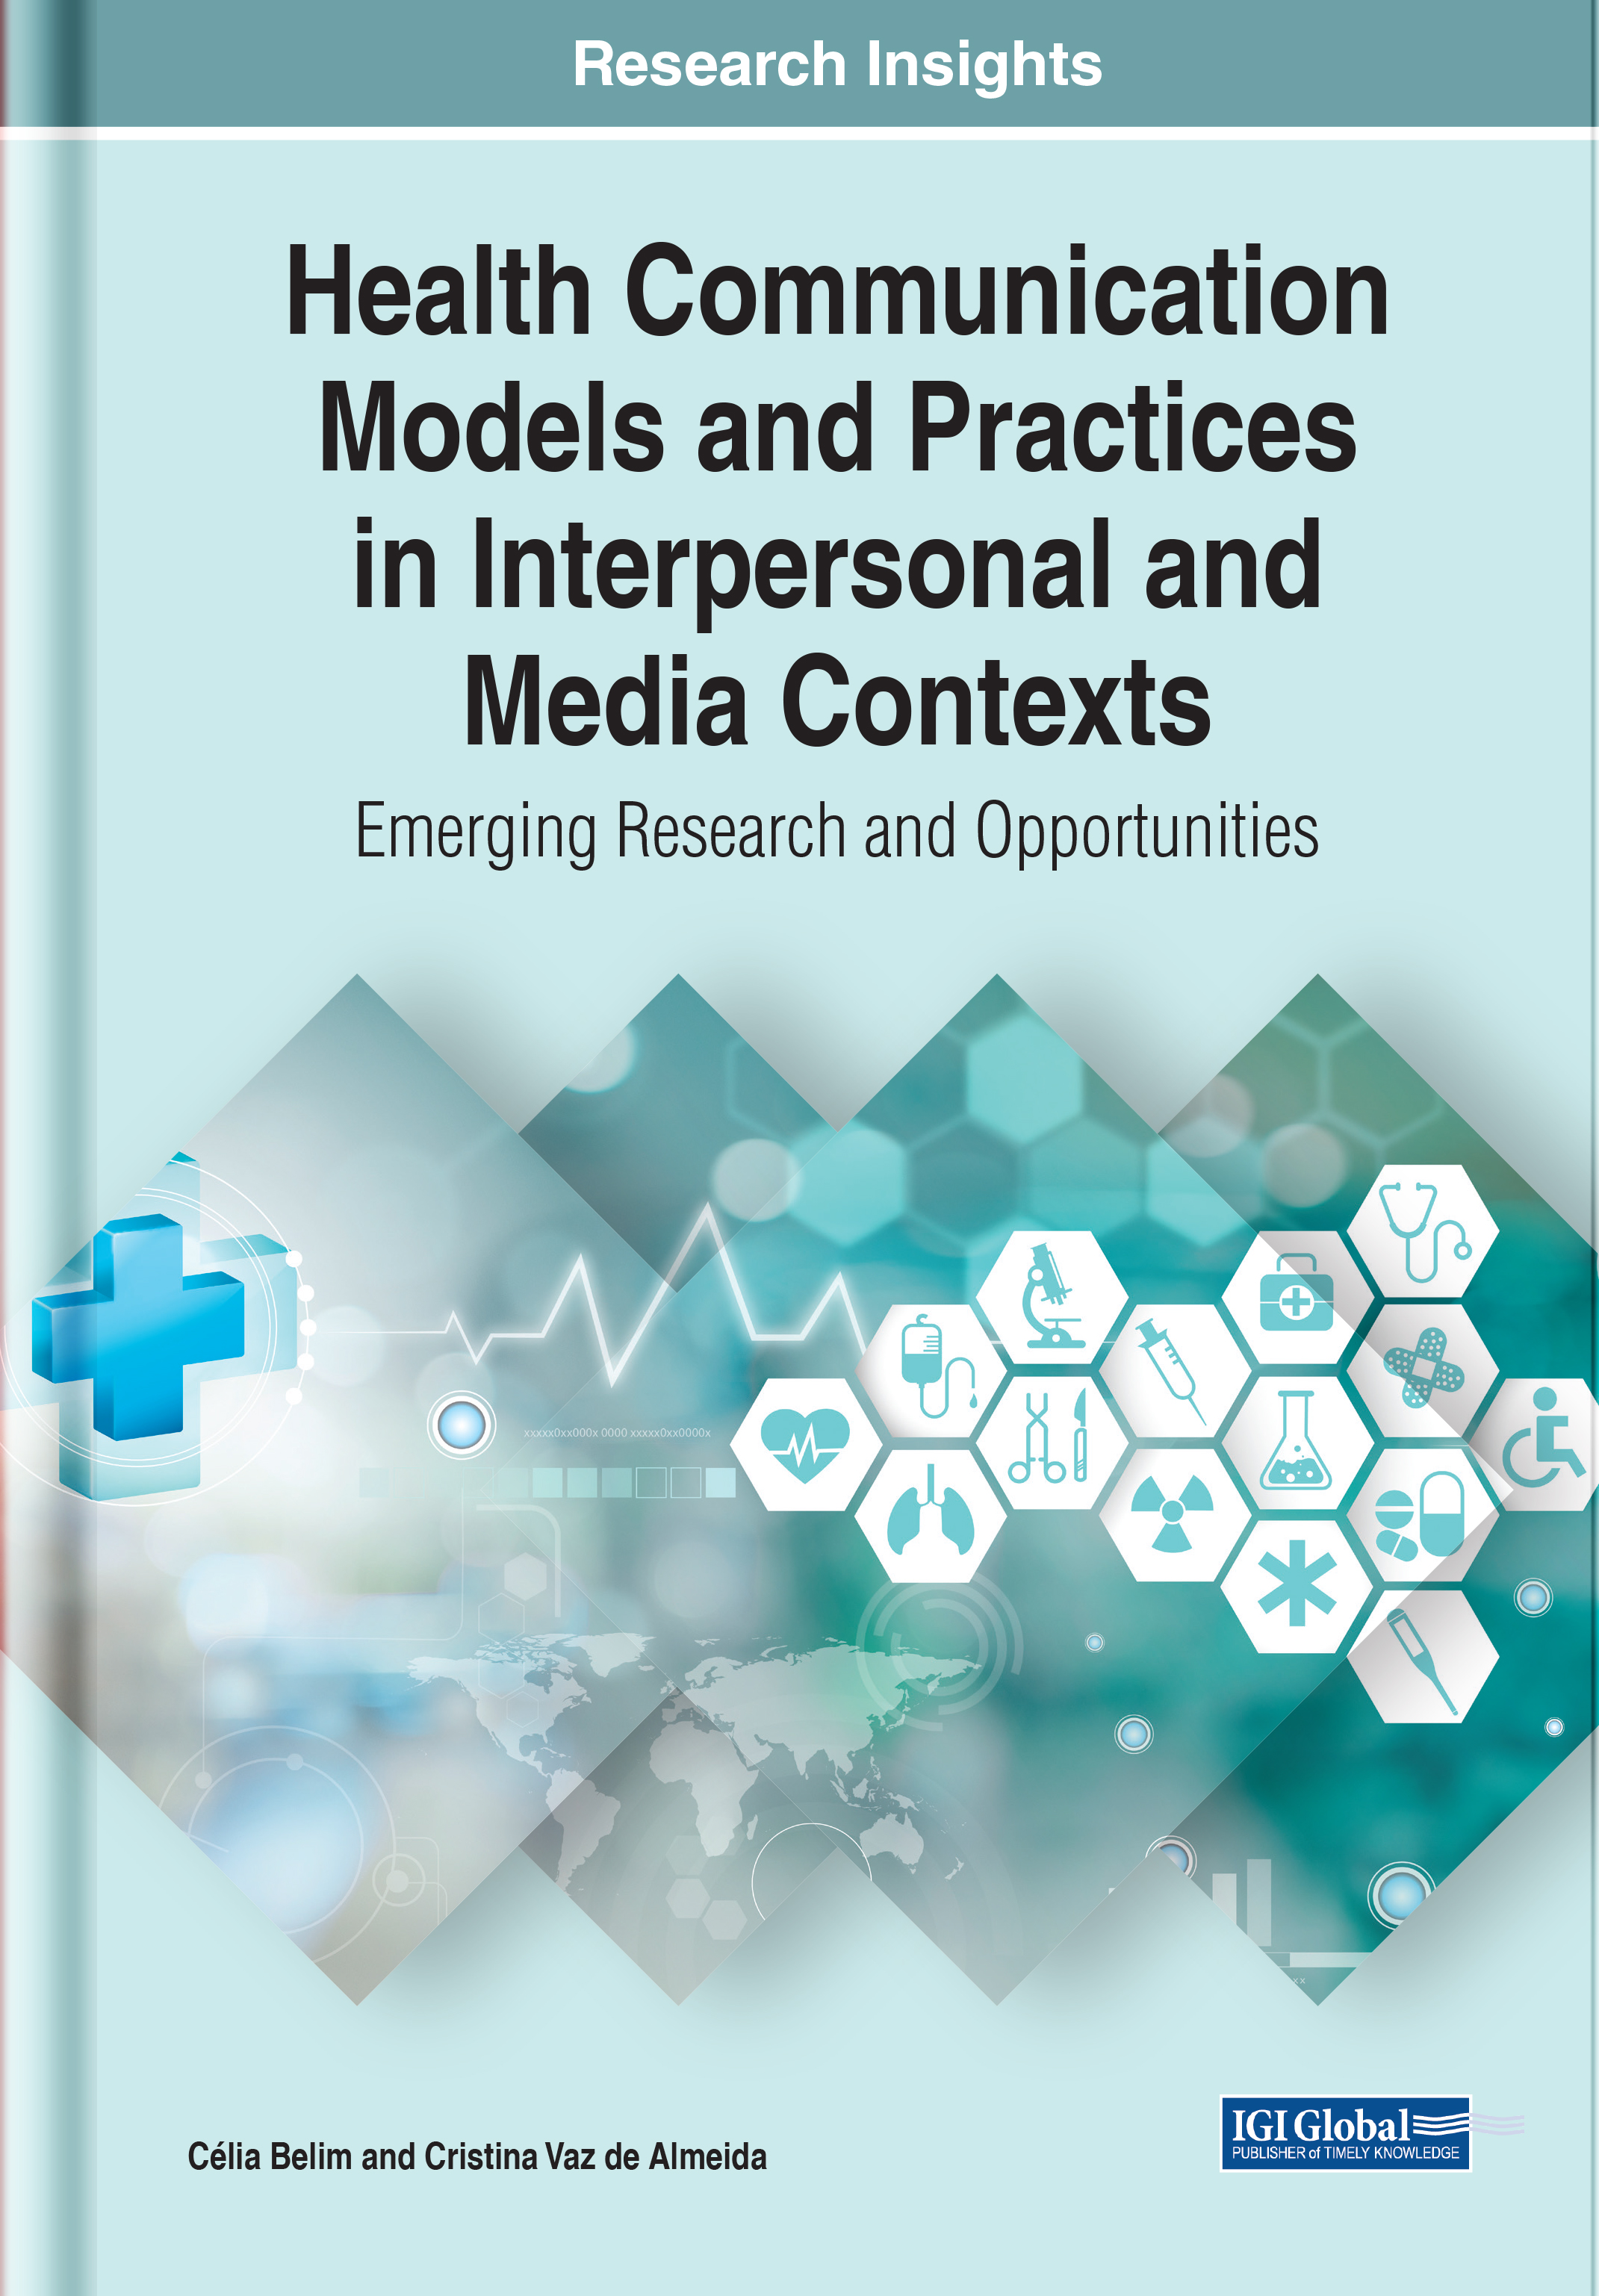 Cover image of the book, Health Communication Models and Practices in Interpersonal and Media Contexts: Emerging Research and Opportunities